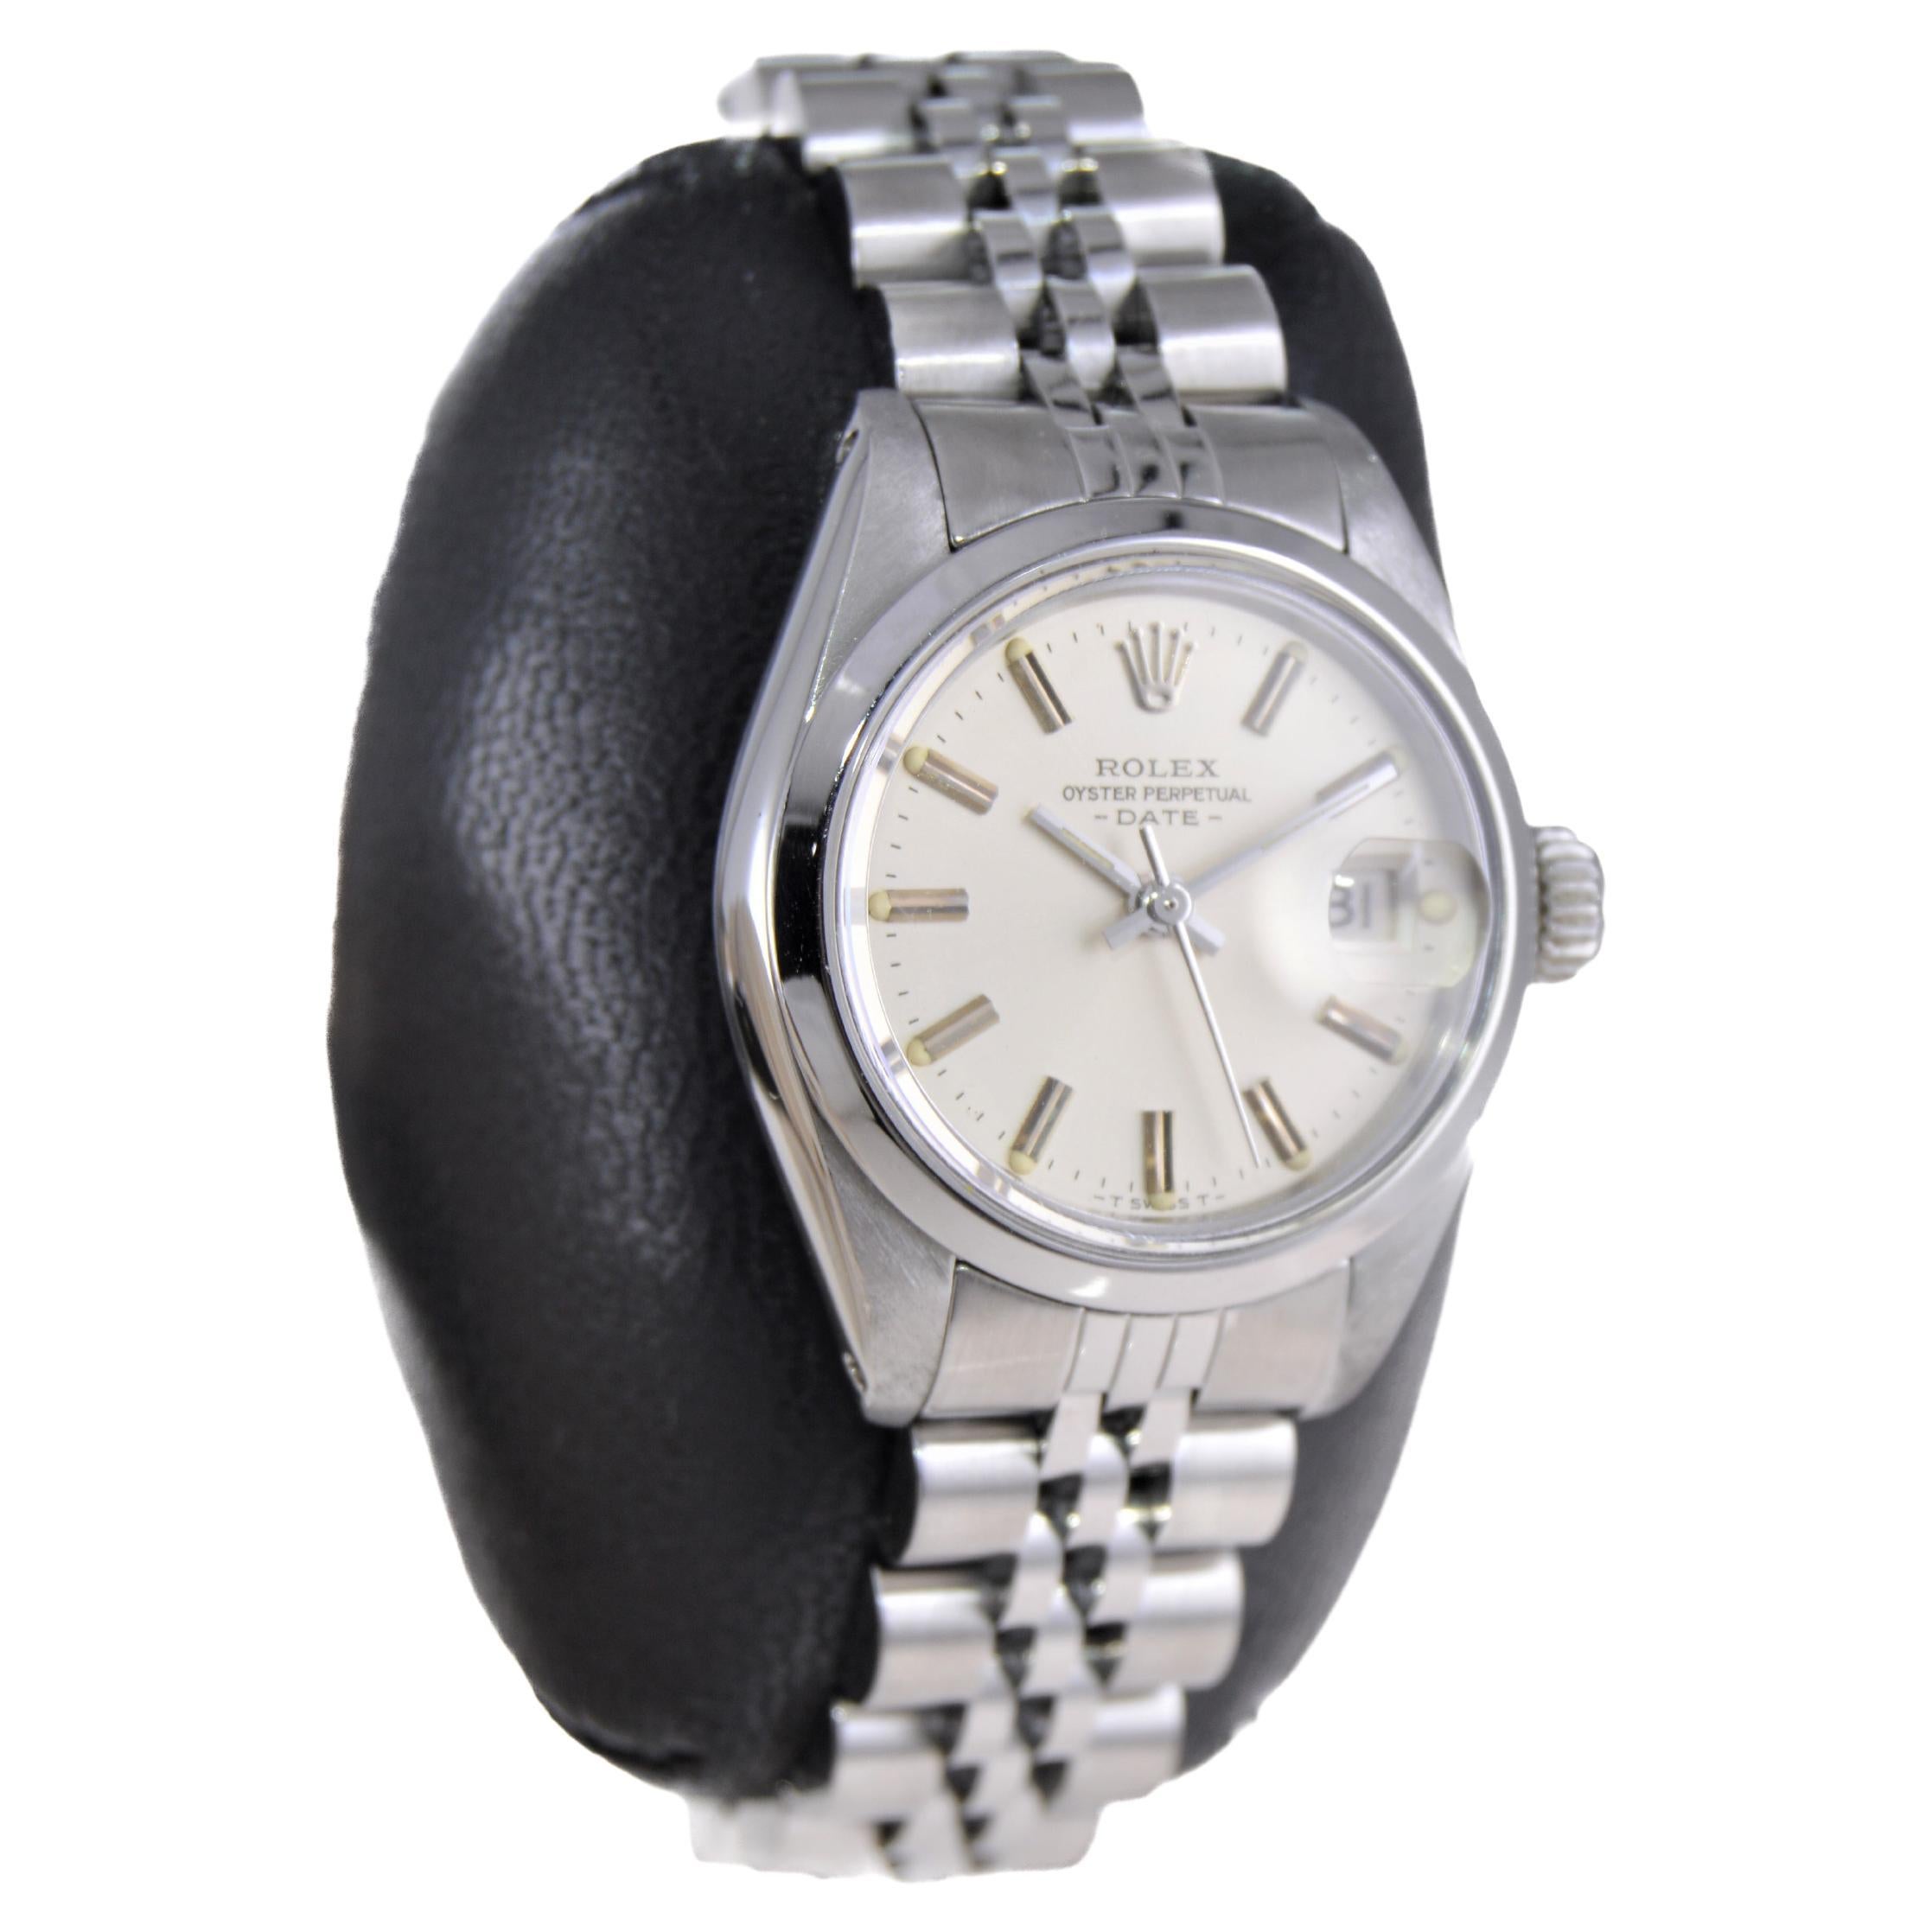 FACTORY / HOUSE: Rolex Watch Company
STYLE / REFERENCE: Oyster Perpetual Date / Reference 6900
METAL / MATERIAL: Stainless Steel
CIRCA / YEAR: 1982
DIMENSIONS / SIZE: Length 32mm X Diameter 26mm
MOVEMENT / CALIBER: Perpetual Winding / 26 Jewels /